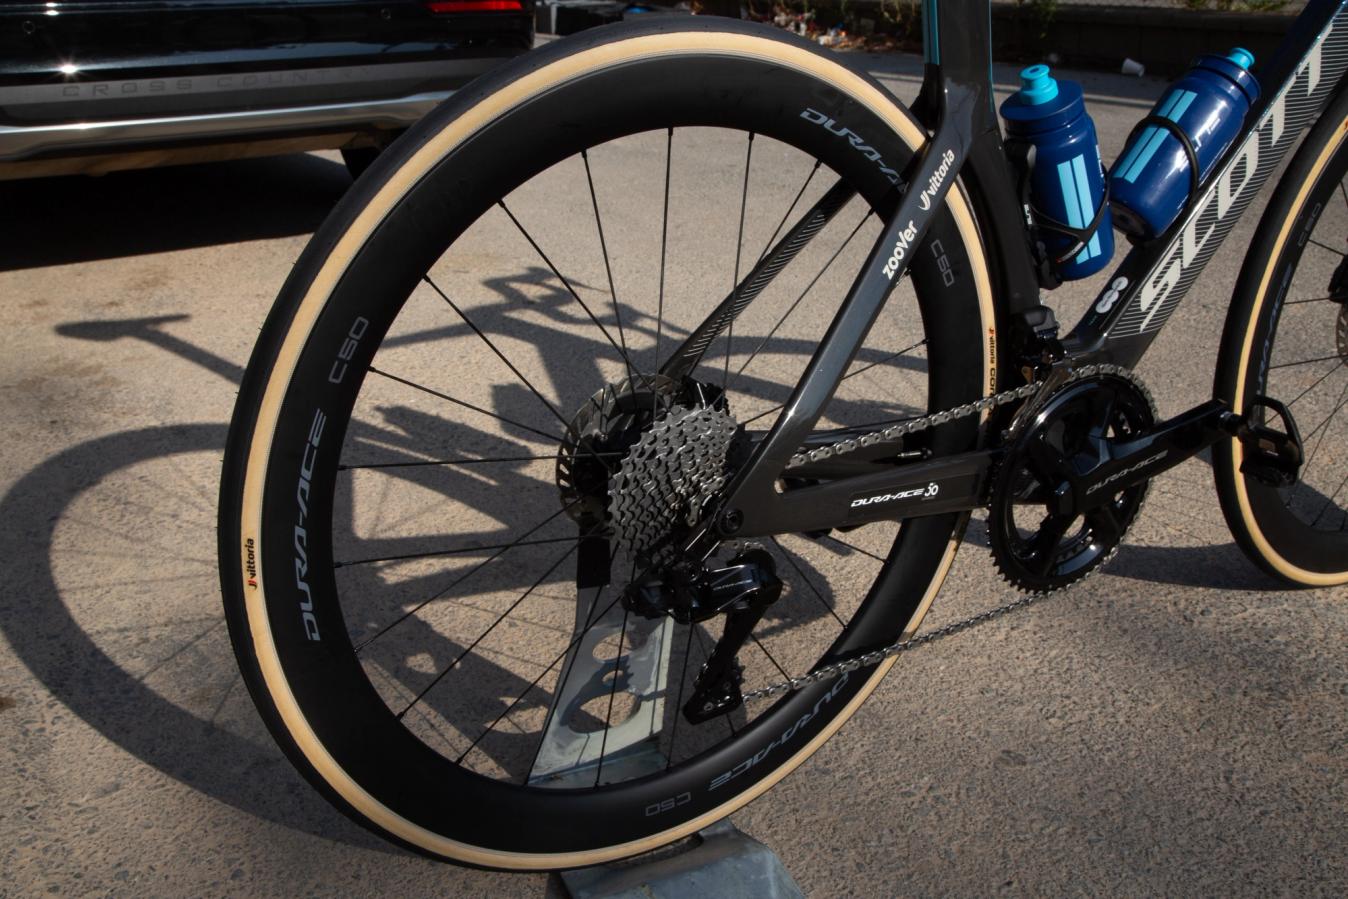 Shimano's Dura-Ace C50s are the wheels of choice